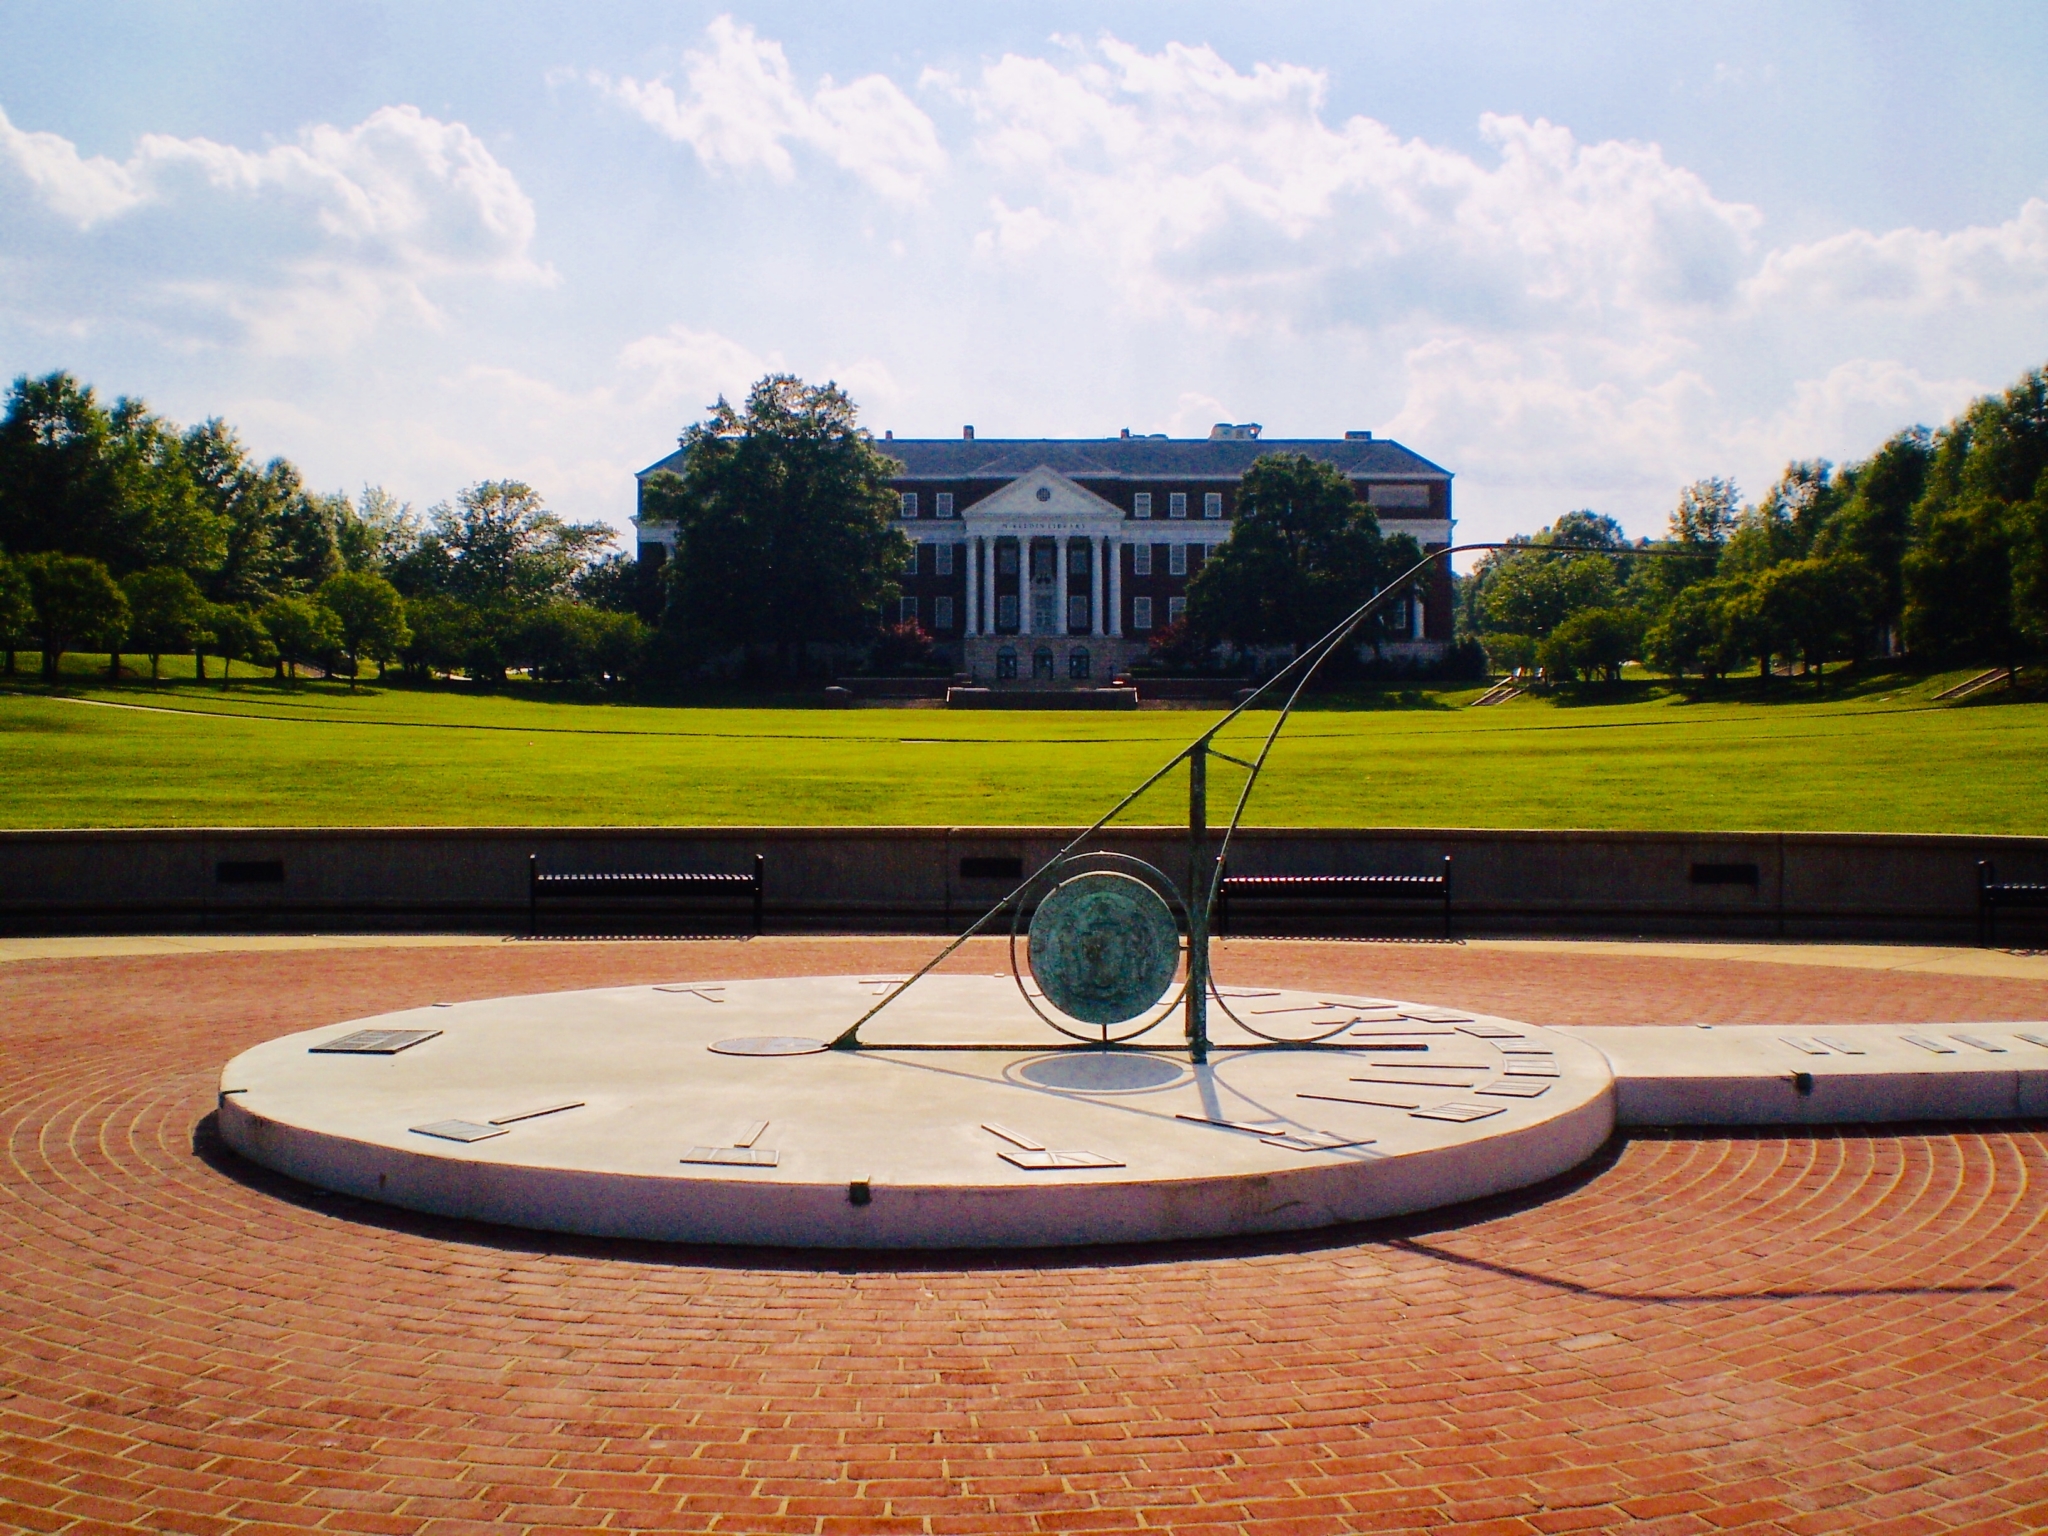 10 UMD Finals Traditions to Give You Good Luck ⋆ College Magazine